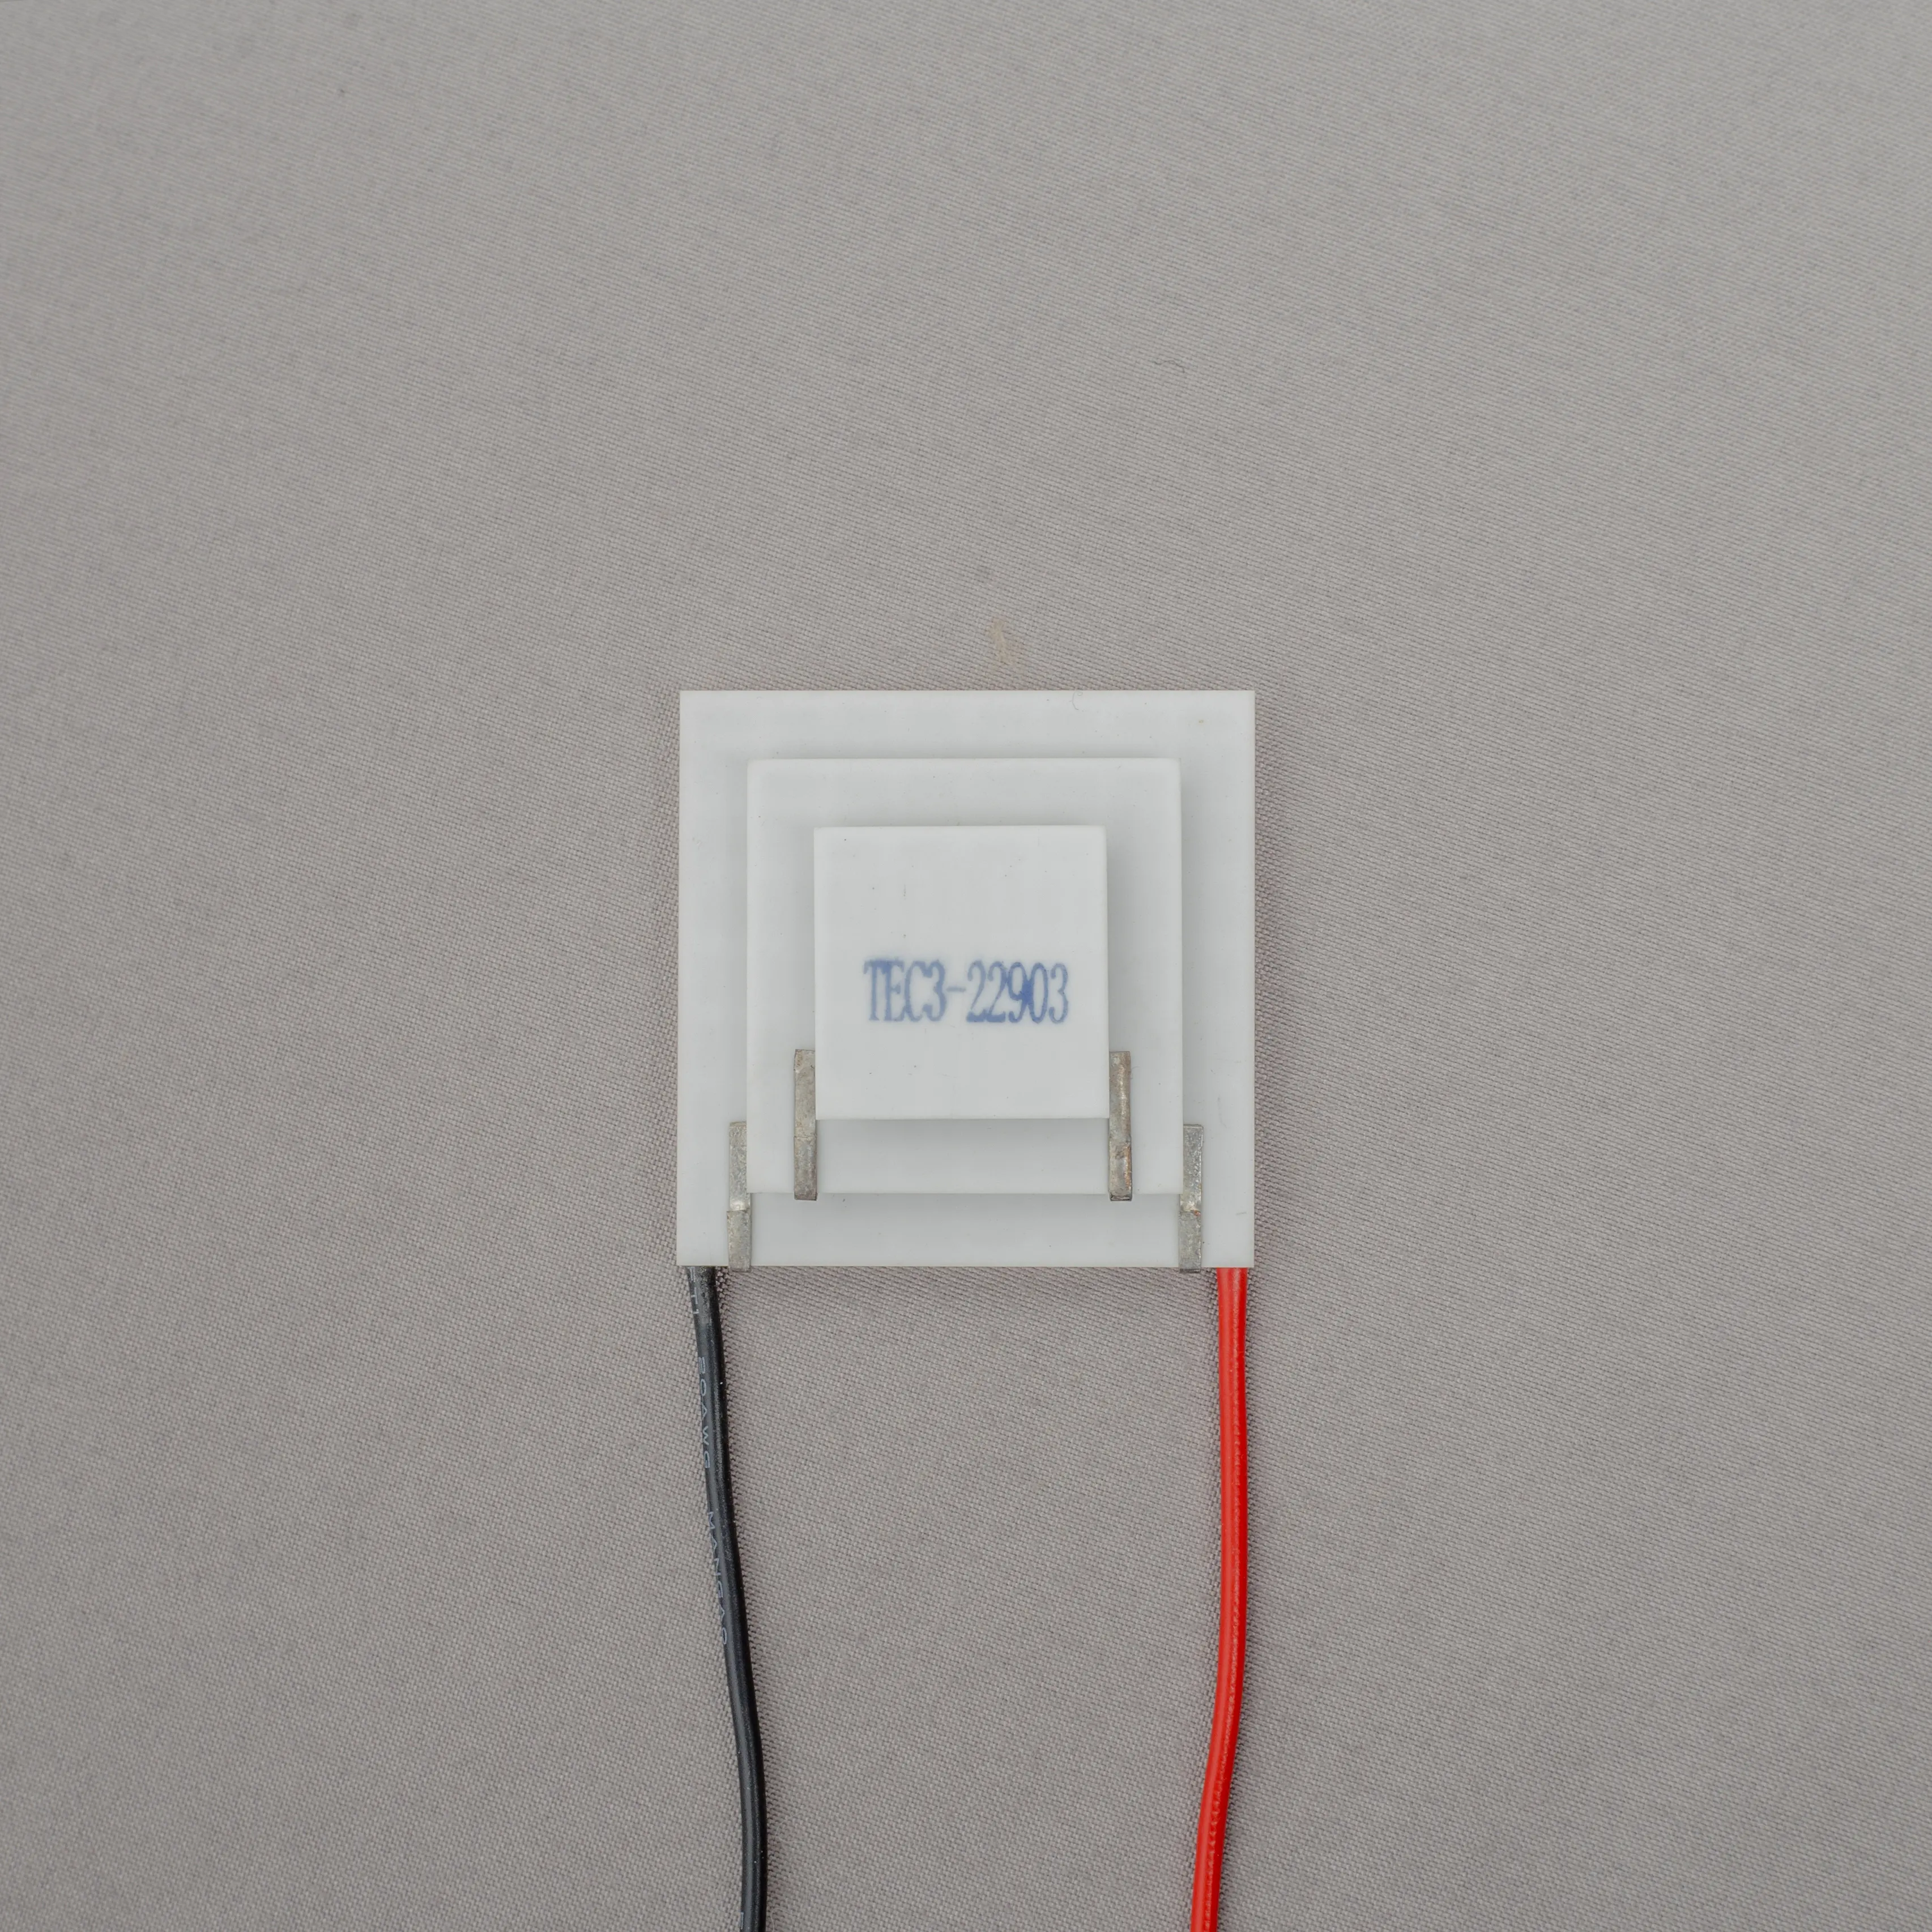 TEC3-22903 thermoelectric cooler peltier plate cooling module